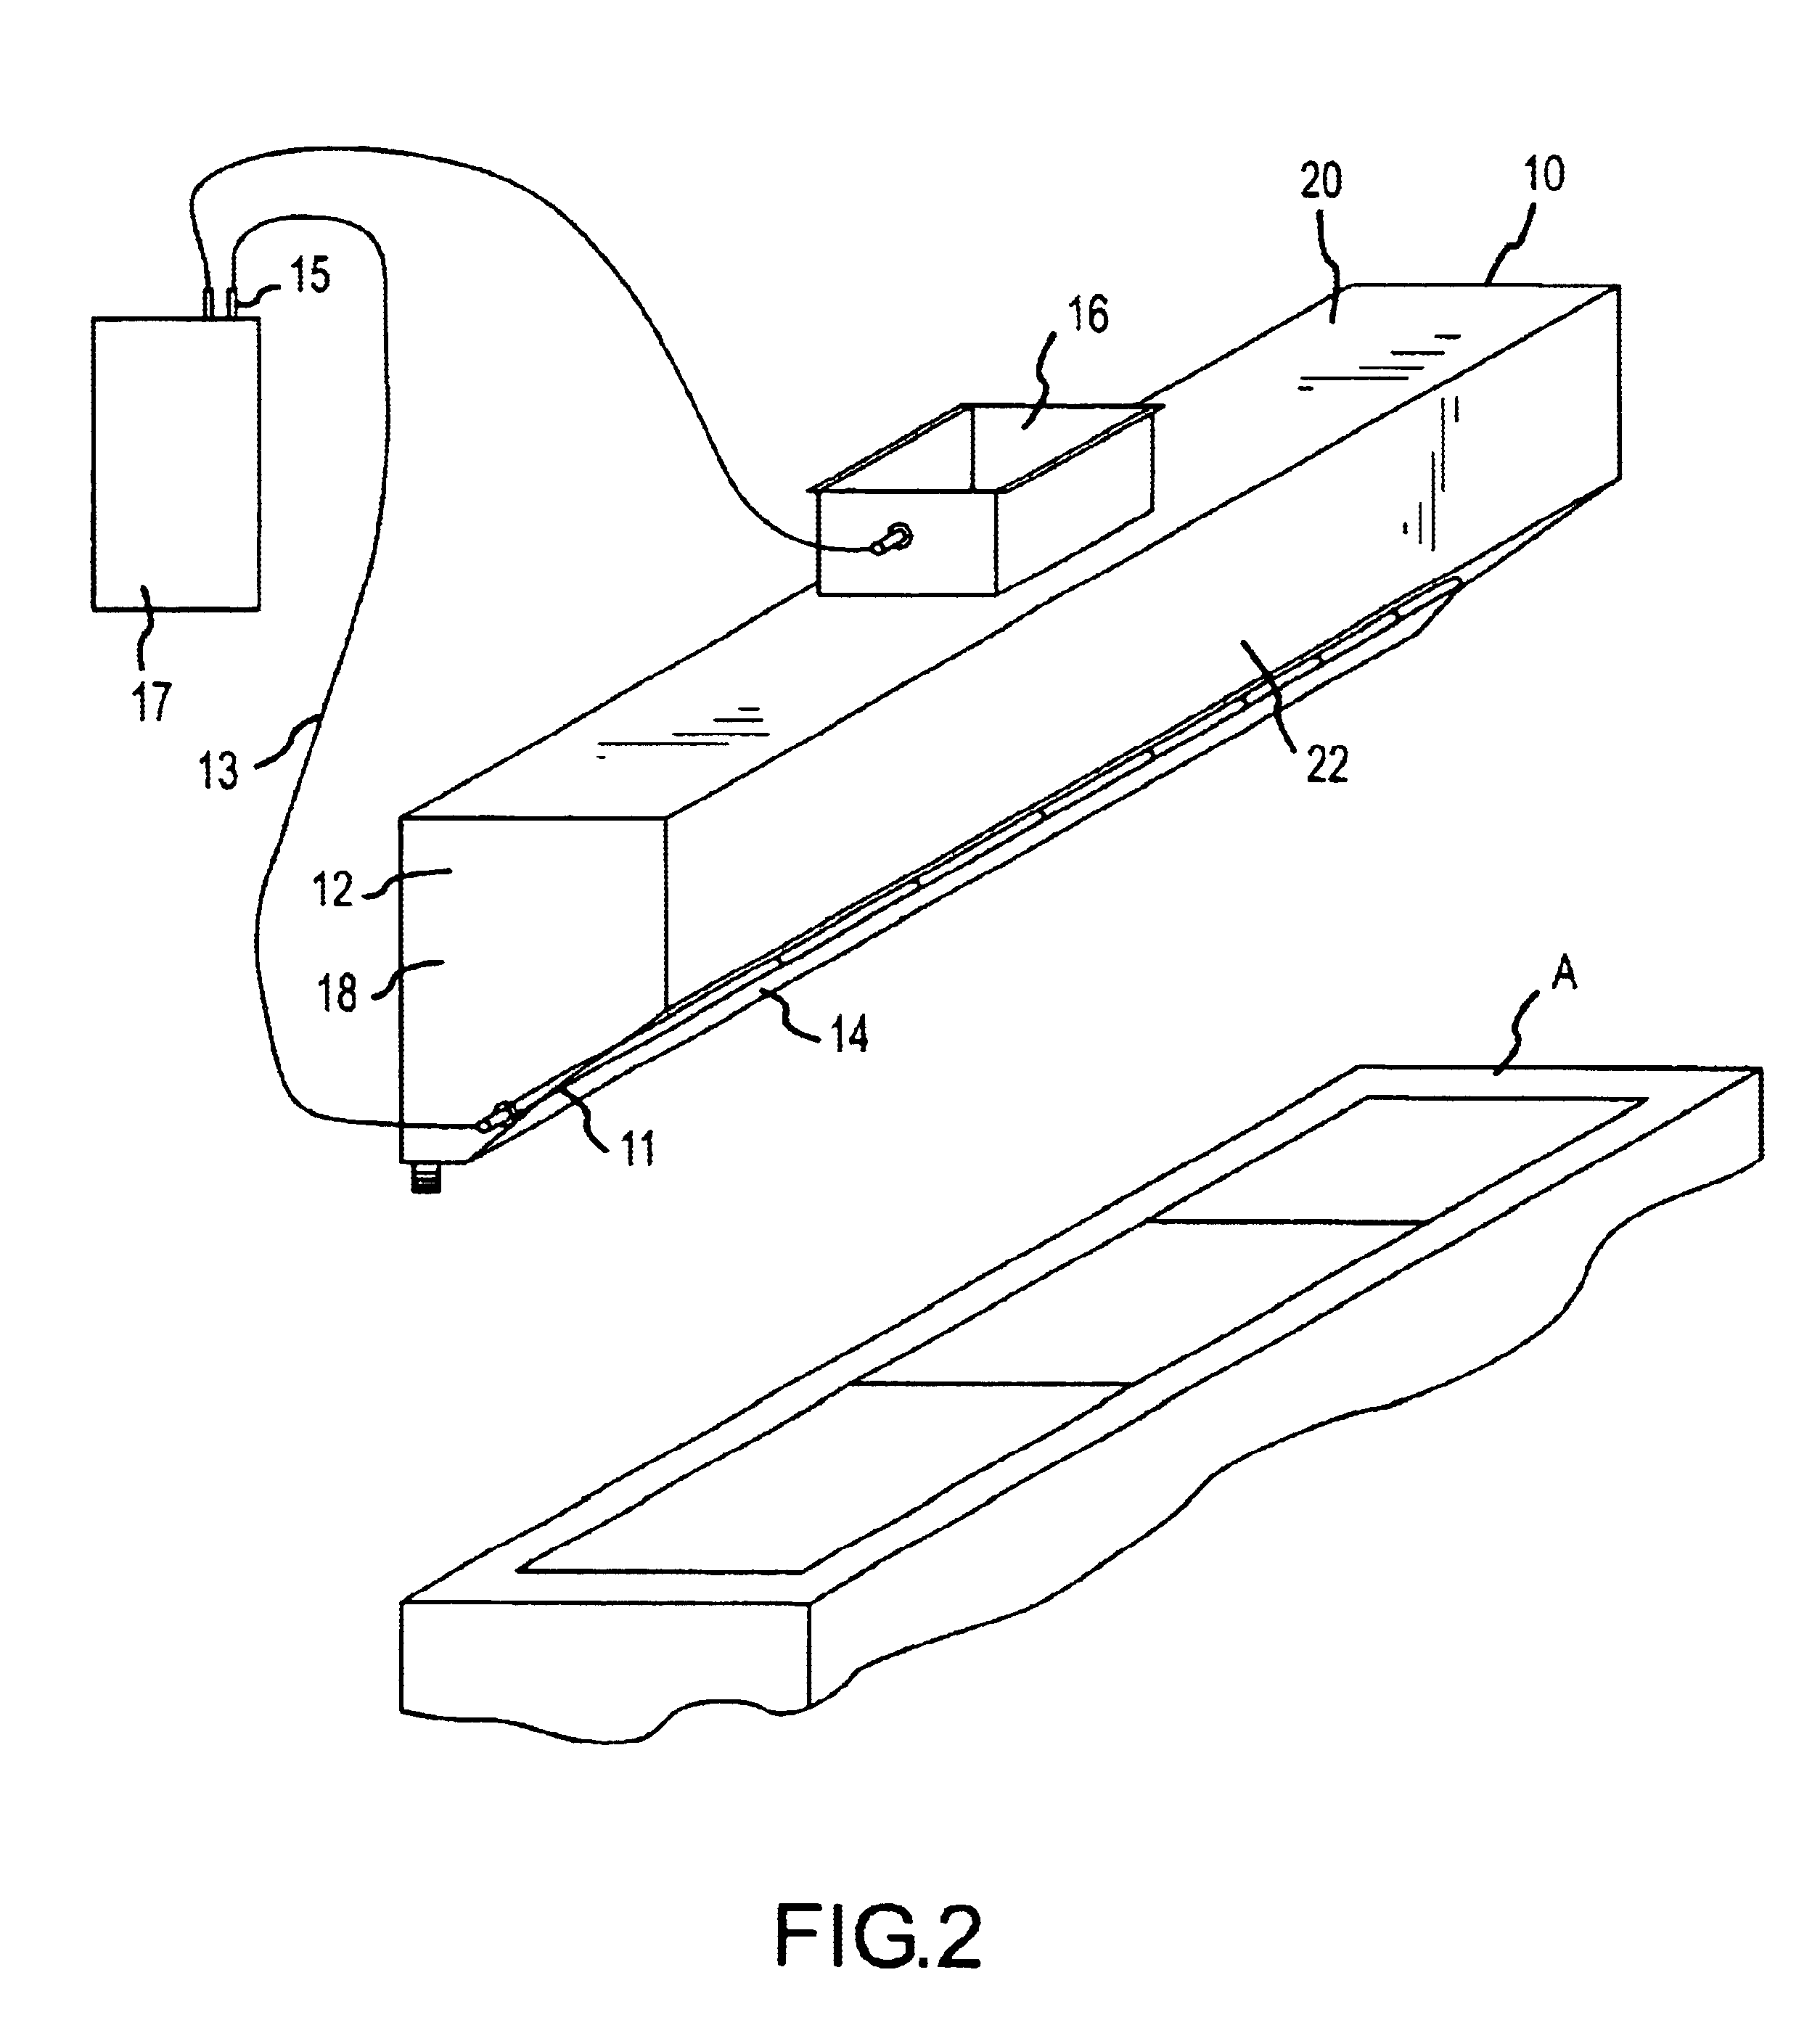 Method and apparatus for removal of grease, smoke and odor from exhaust systems